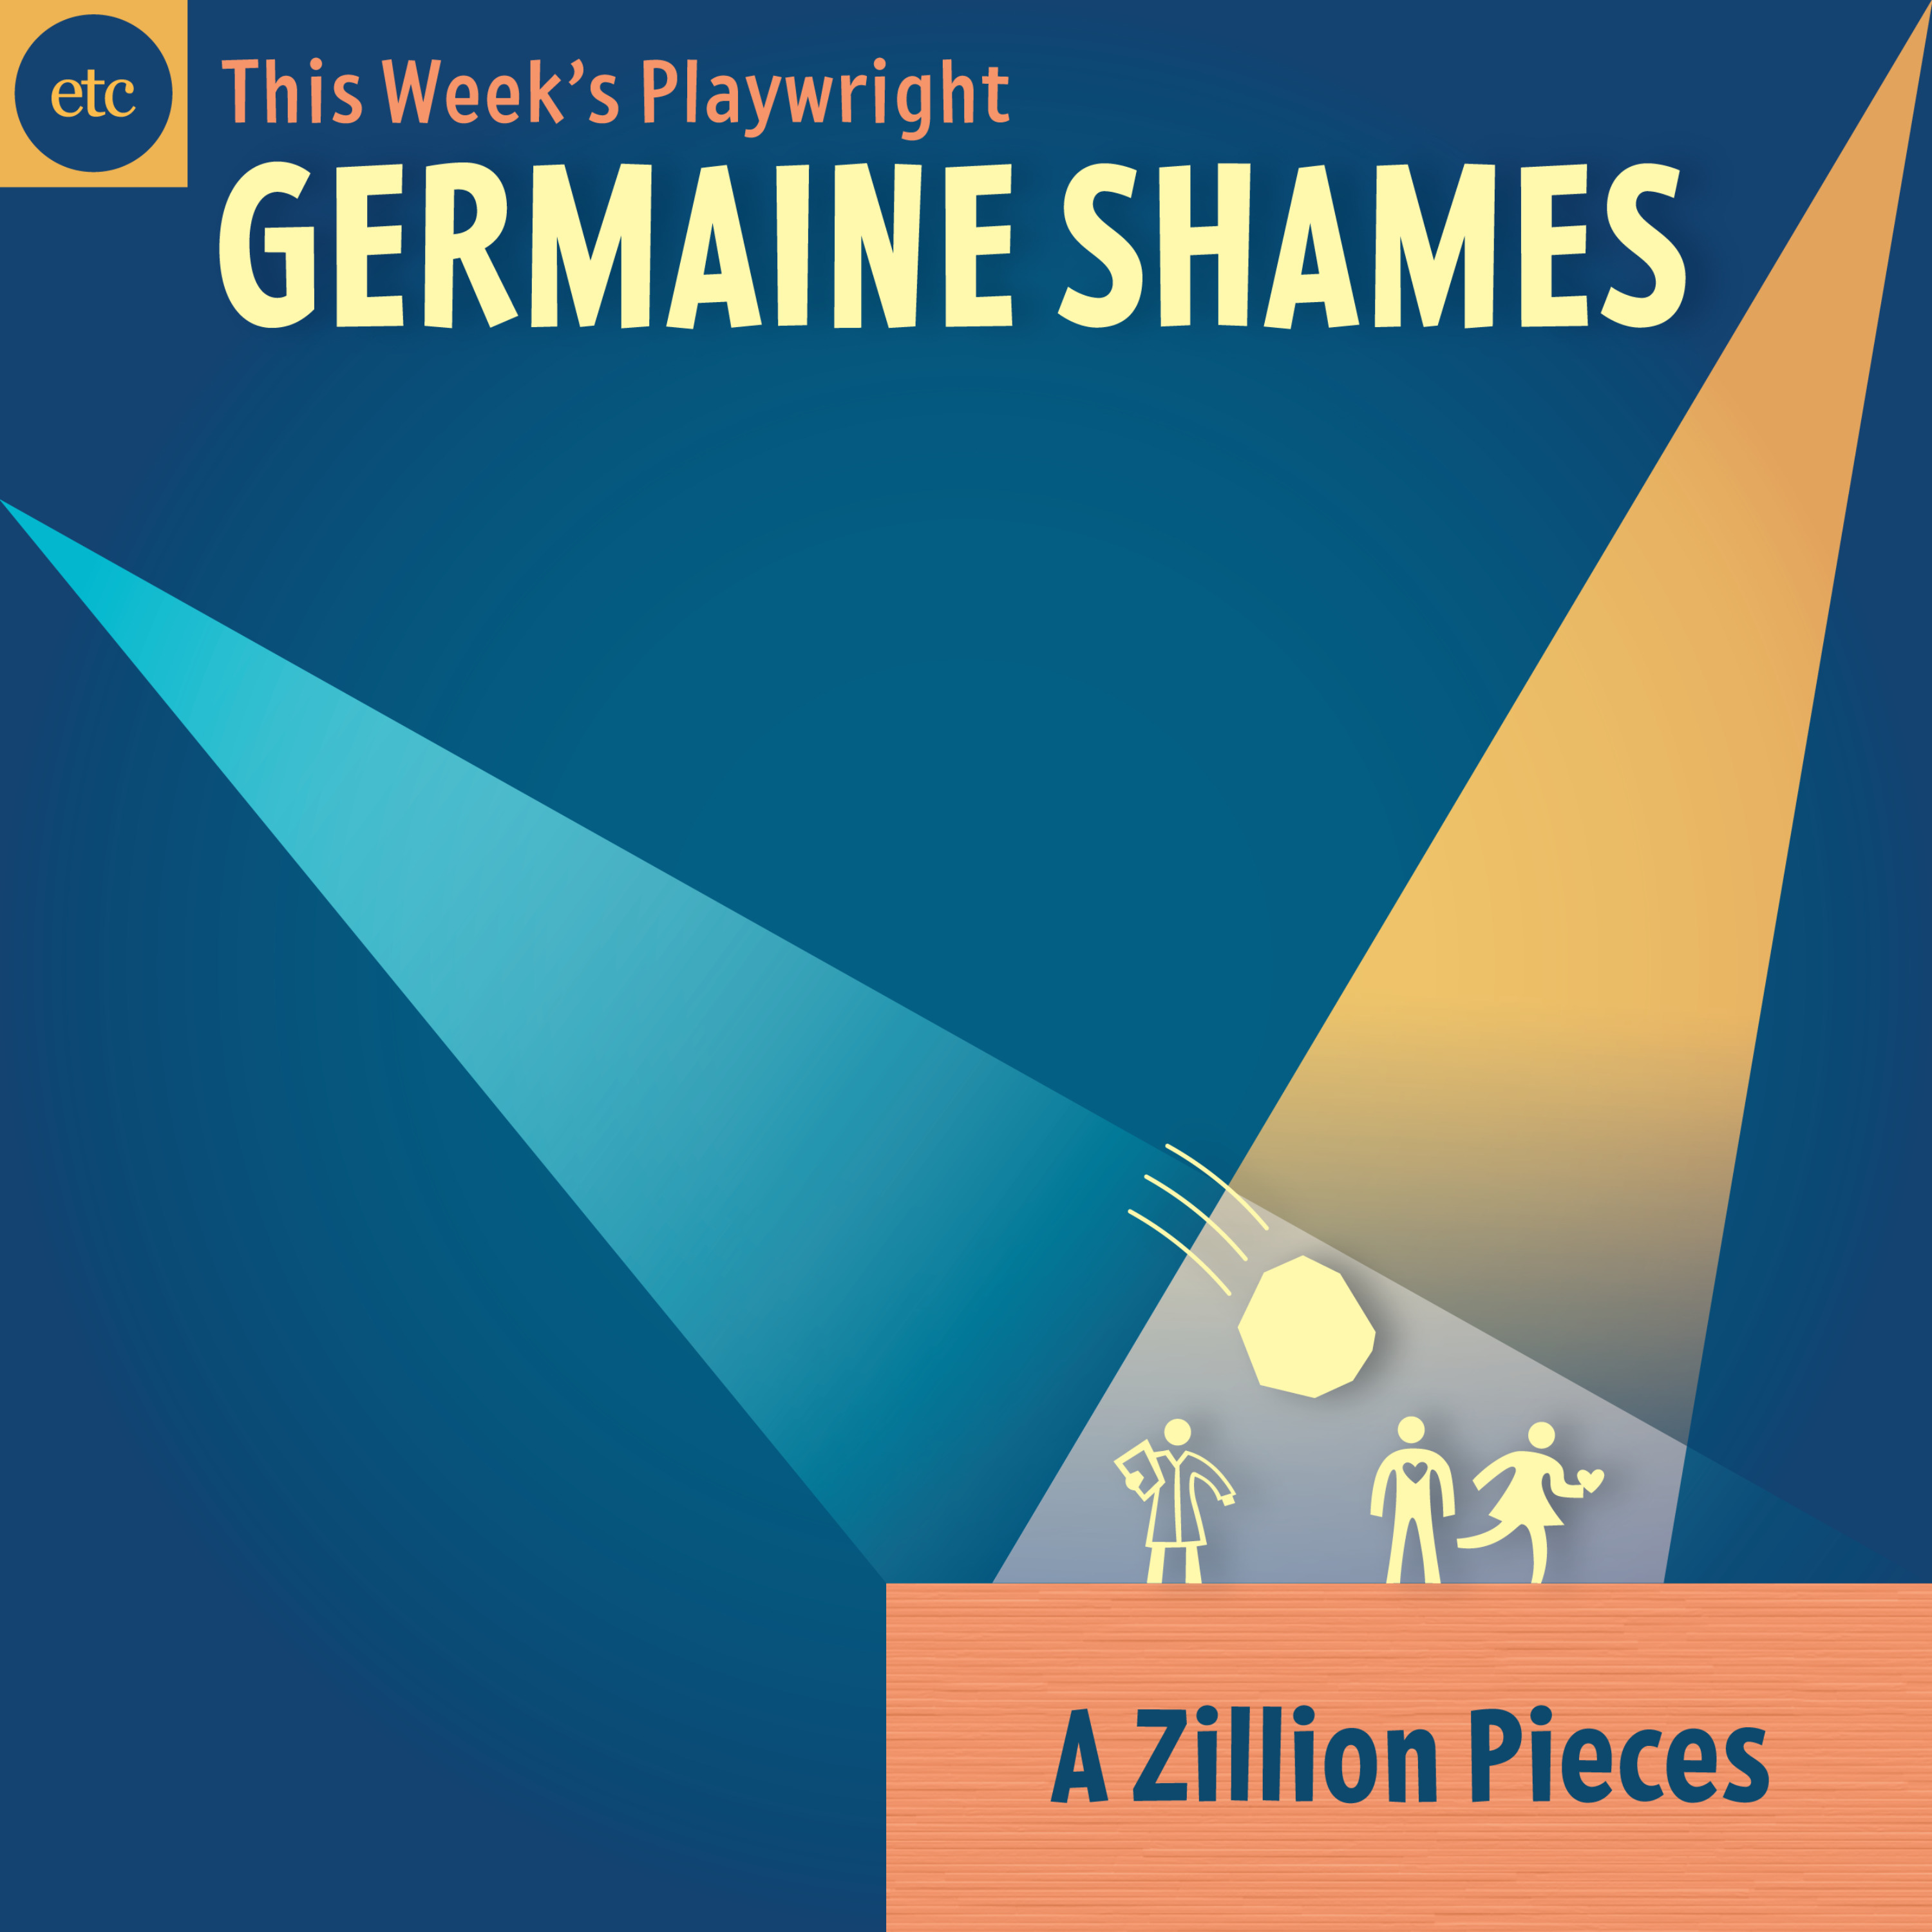 A ZILLION PIECES by Germaine Shames